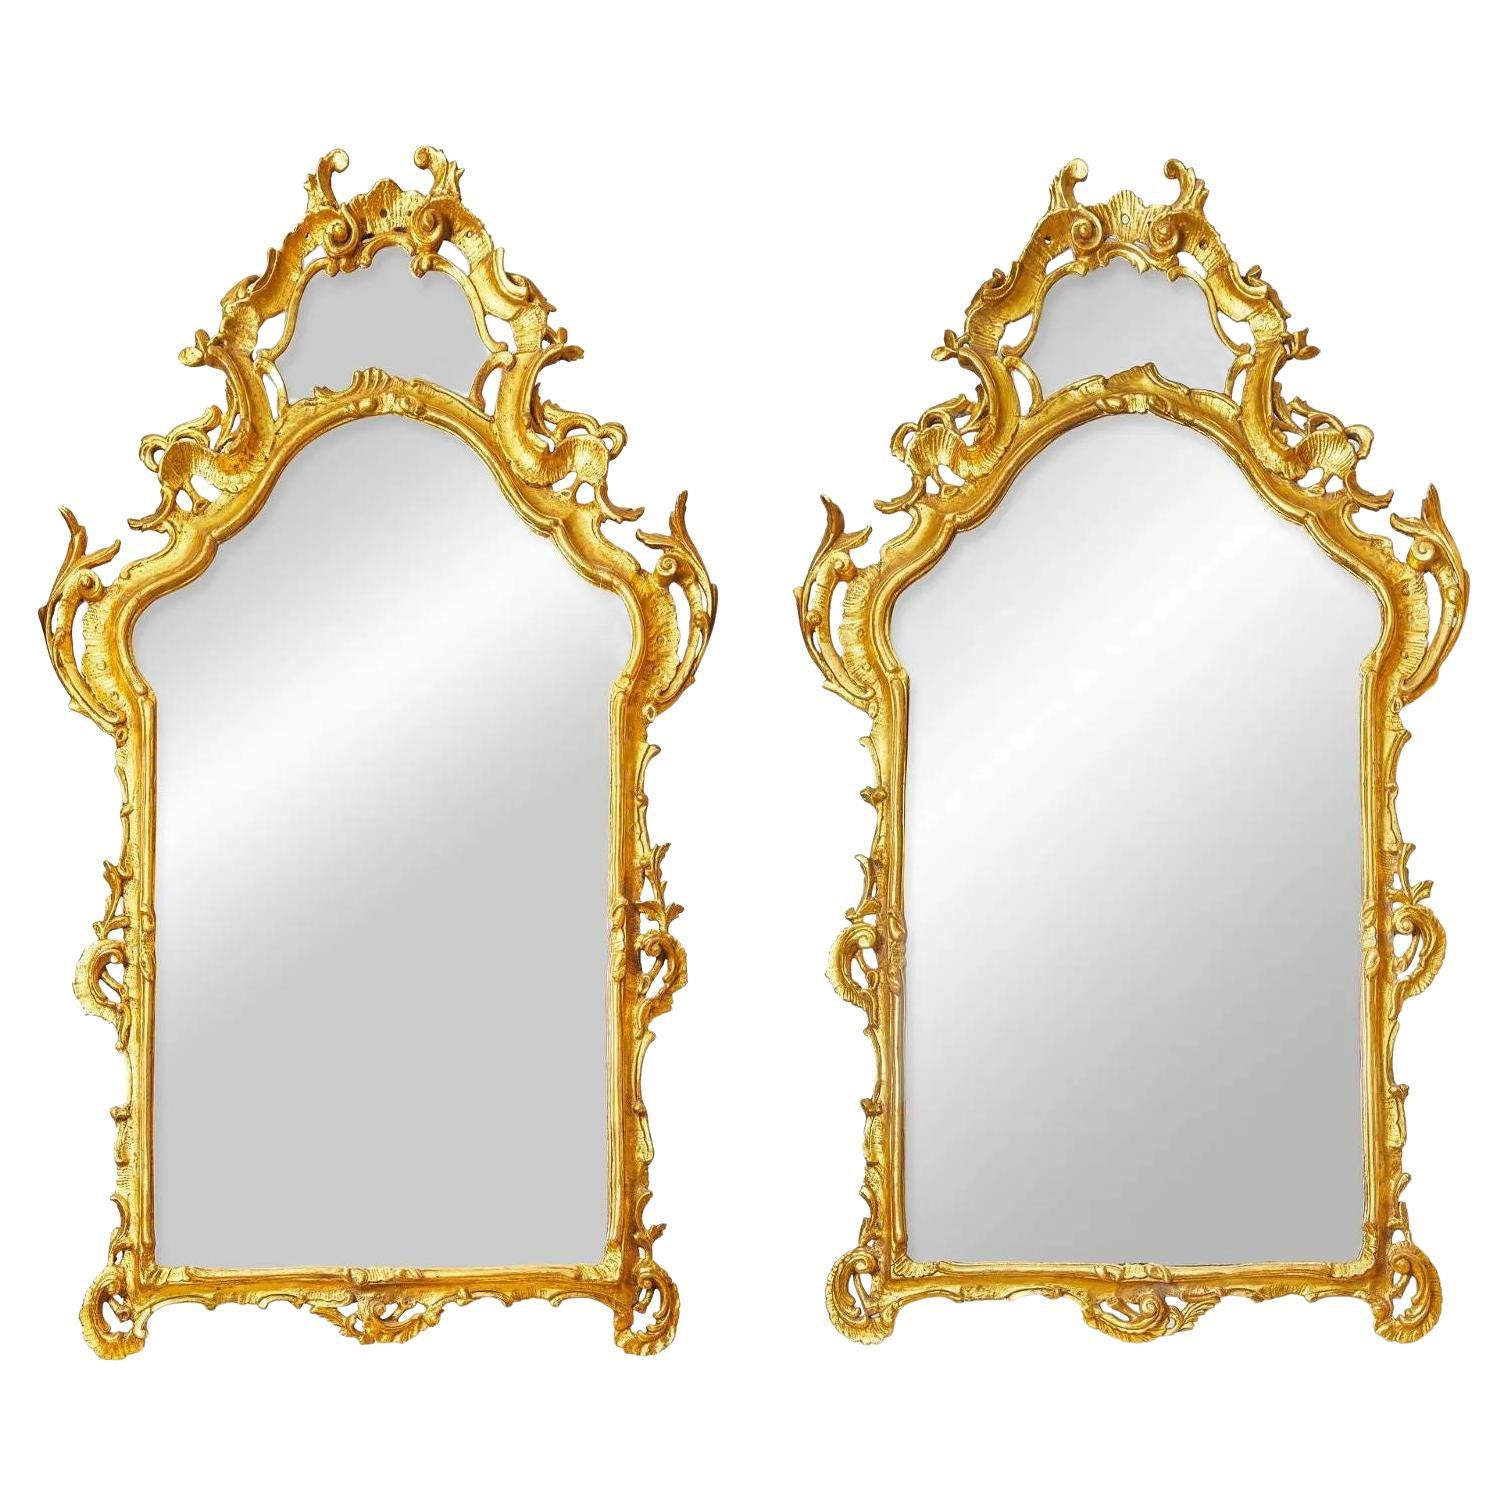 Pair of Late 19th Century Italian Rococo Giltwood Mirrors For Sale